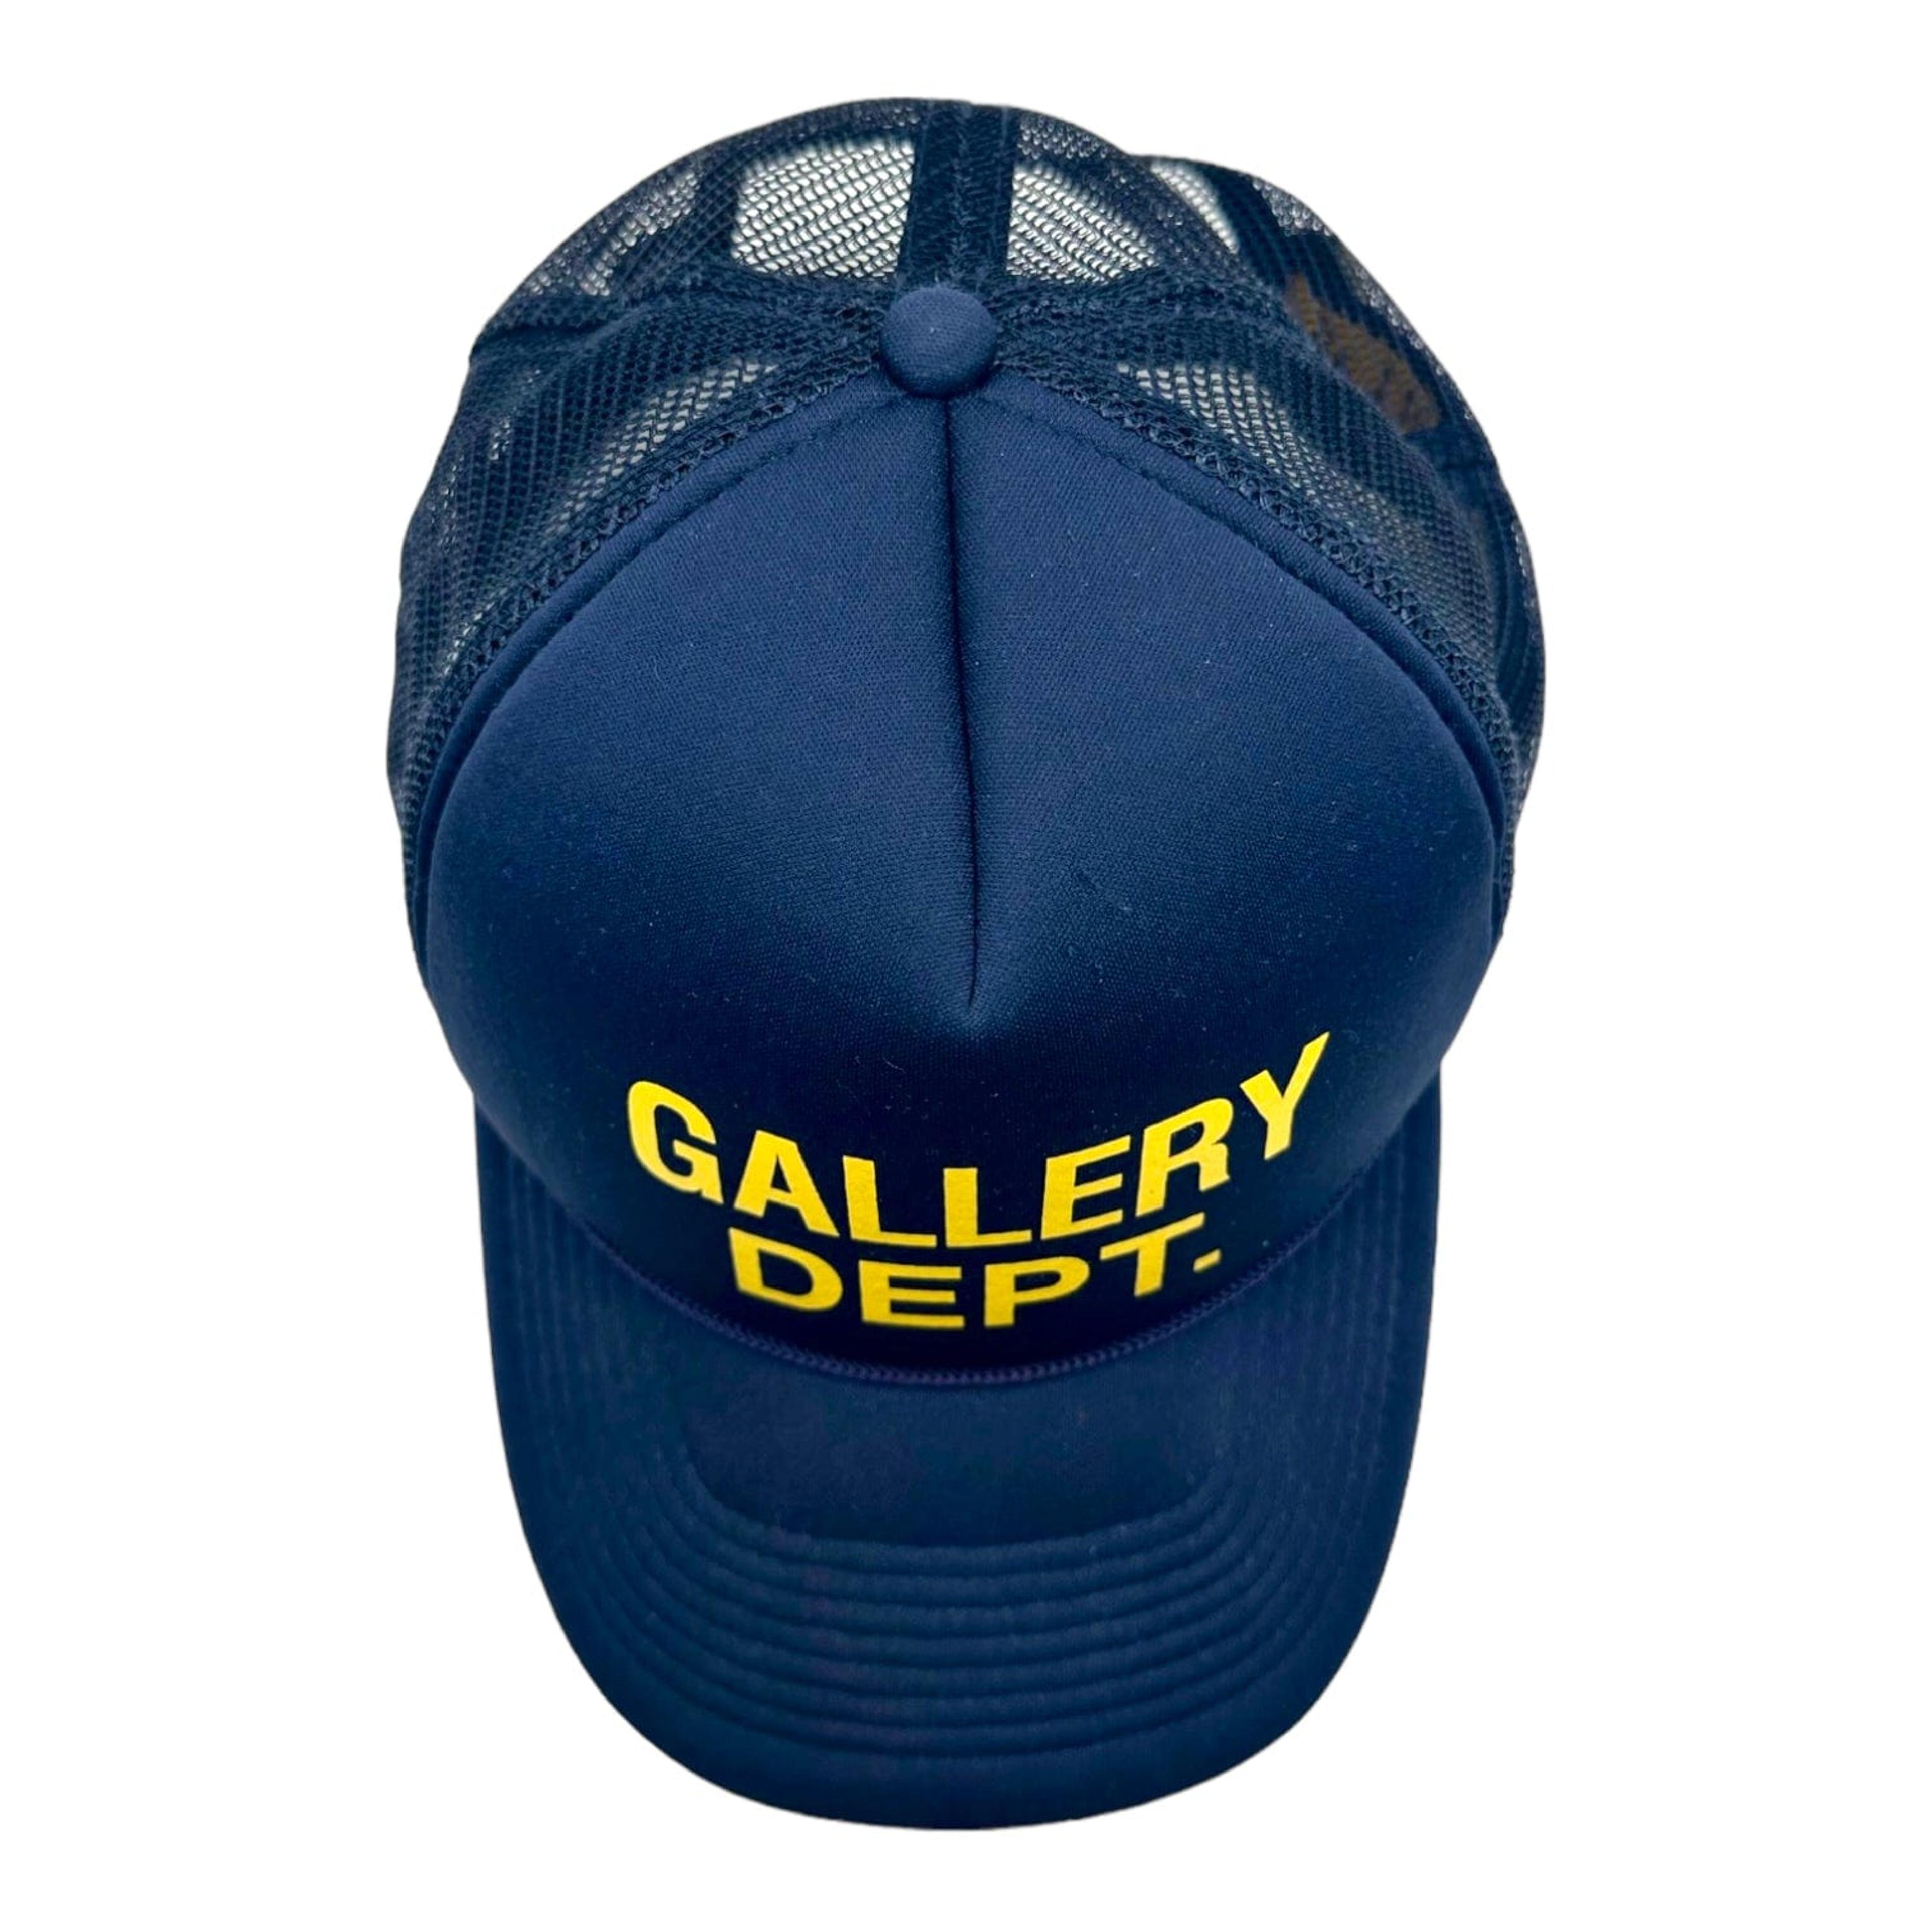 Alternate View 1 of Gallery Department Logo Trucker Hat Navy/Yellow Pre-Owned